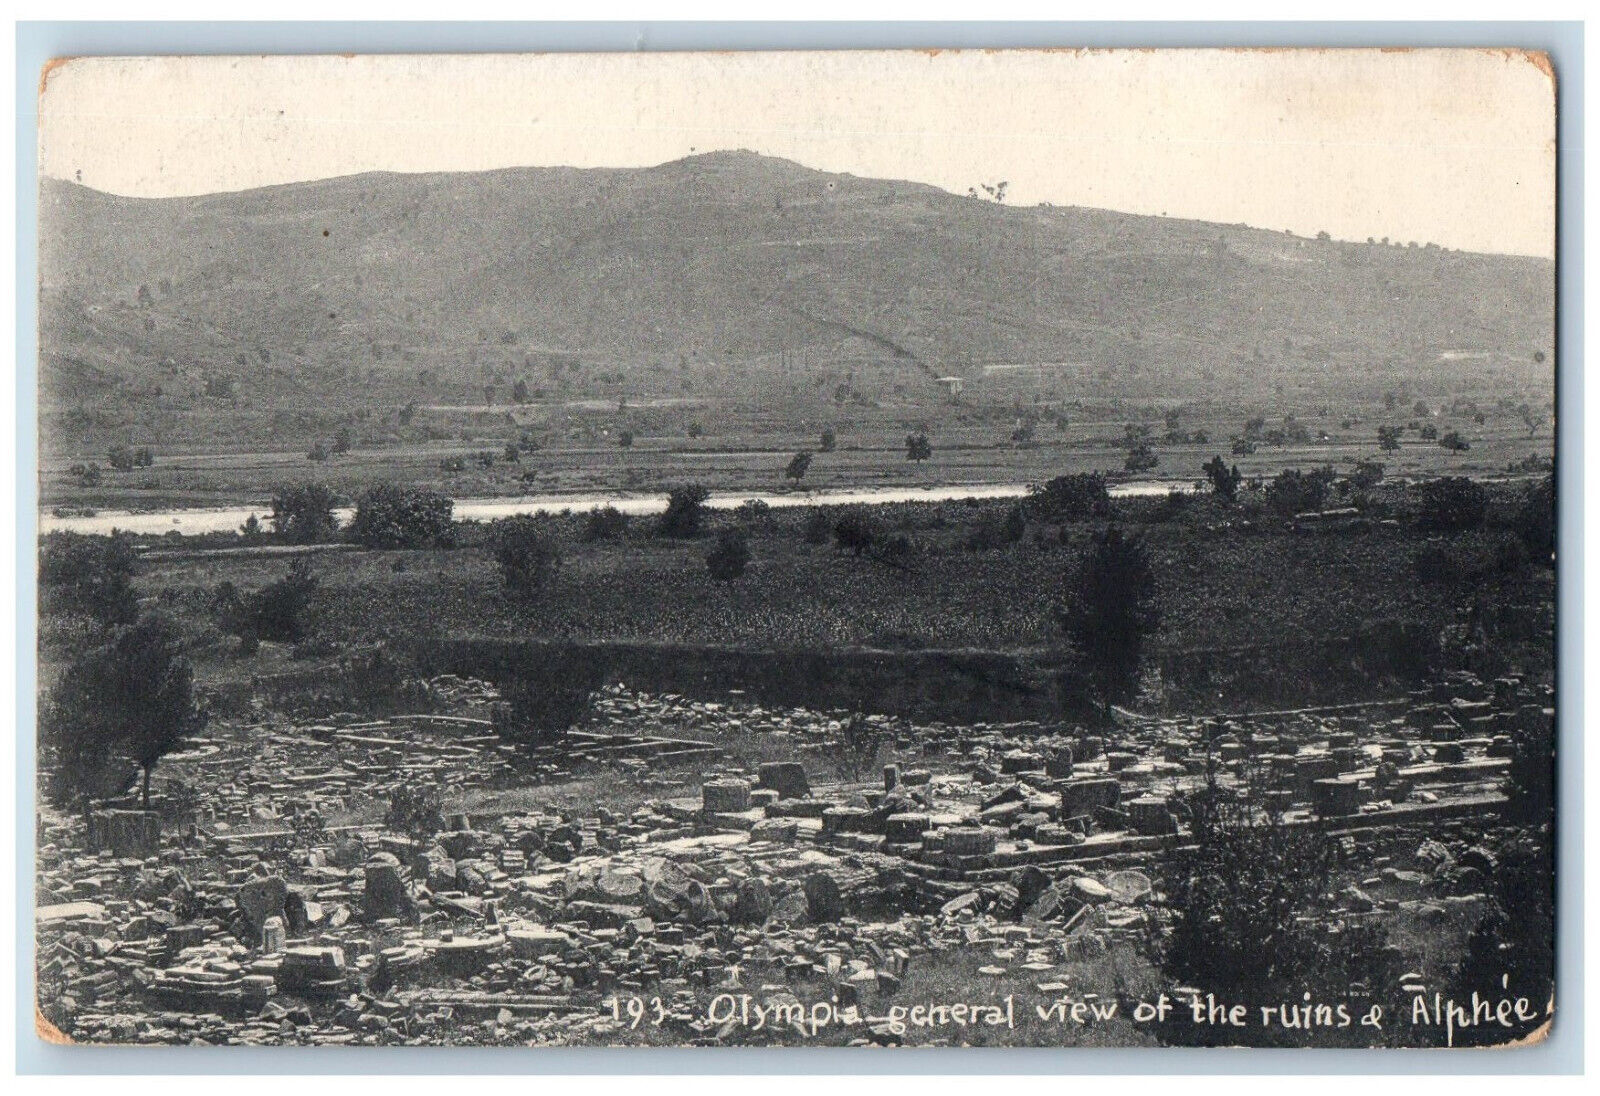 Hellas Greece Postcard Olympia General View of Ruins and Alphee c1910